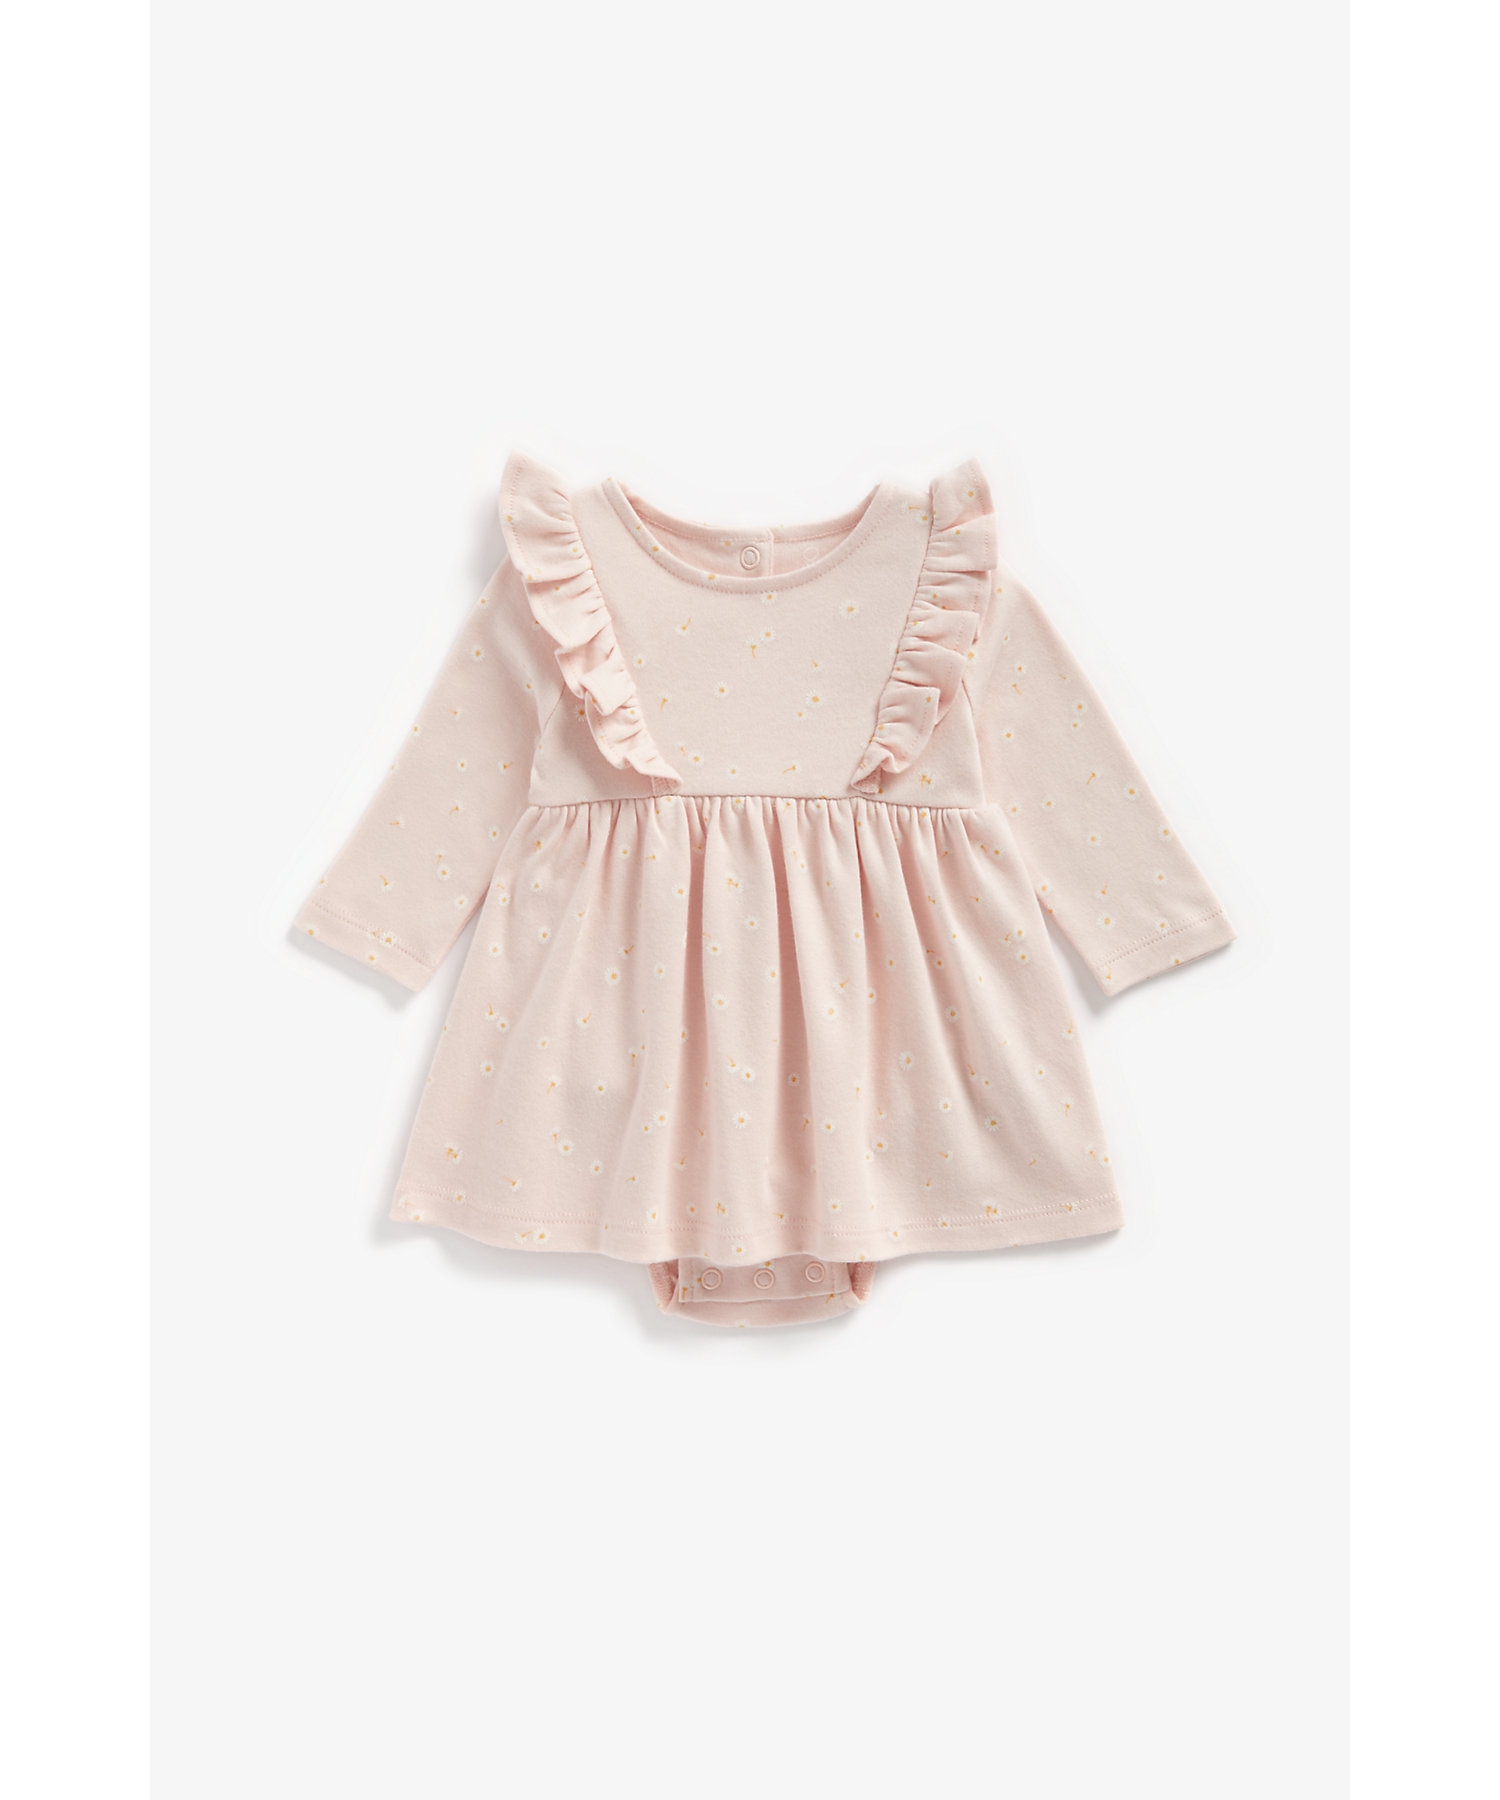 Mothercare | Girls Full Sleeves Frilled Romper Dress Floral Print - Pink